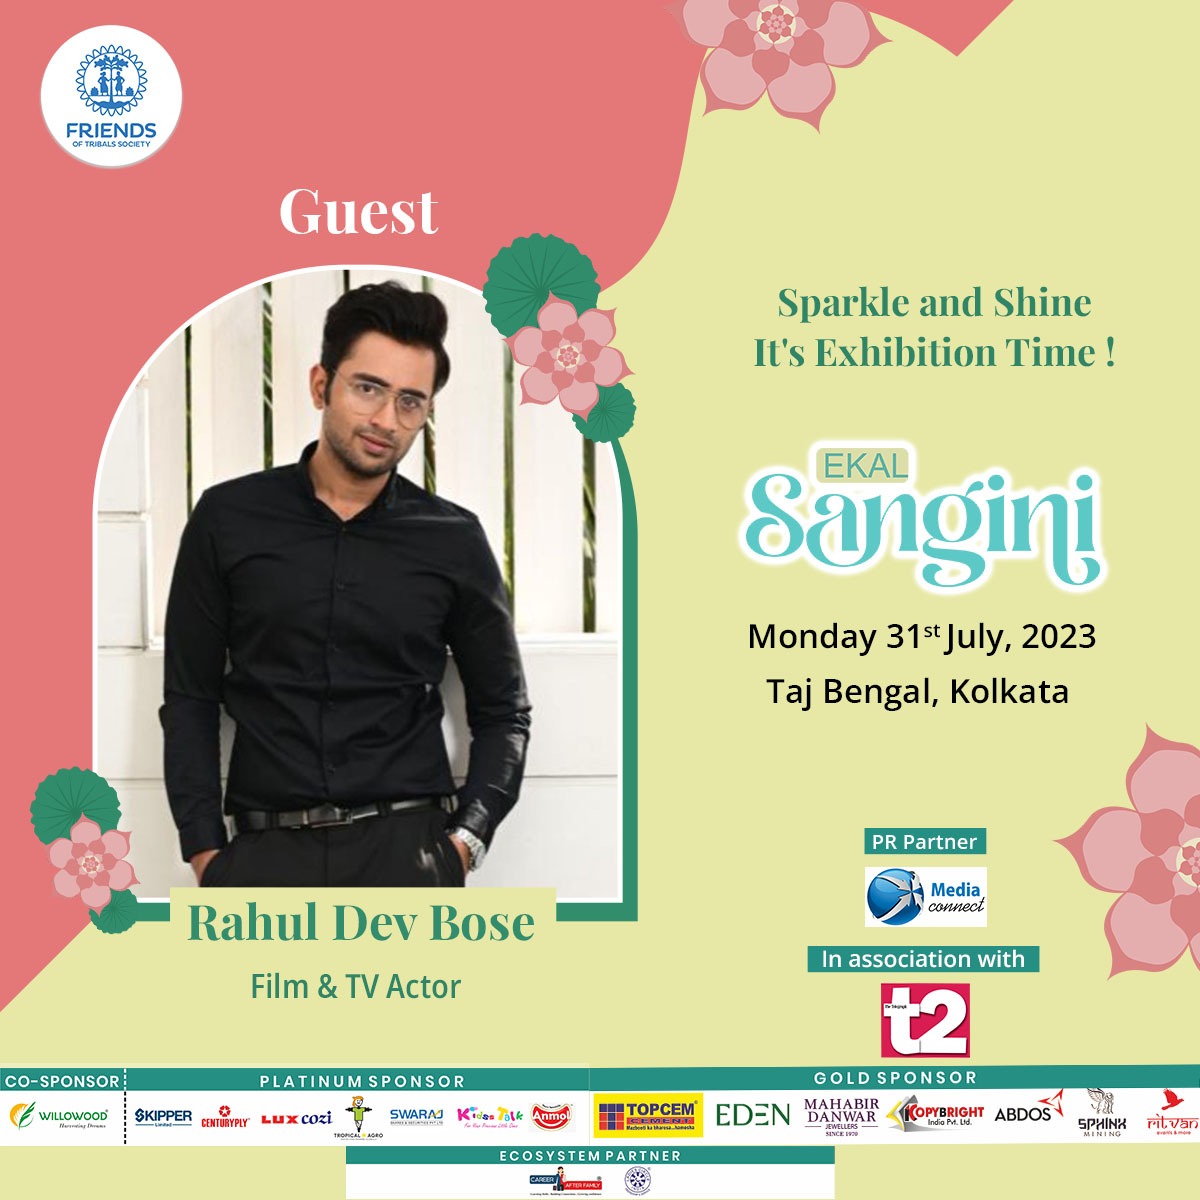 Ekal Sangini is ready to add a touch of sophistication and charm to your lifestyle. Rahul Dev Bose, Film & Television Actor will add glamour to the event as special guest. Visit 'Ekal Sangini' An exhibition by FTS at Taj Bengal, Kolkata. Only for 31st July, 2023. @RahulDevBose